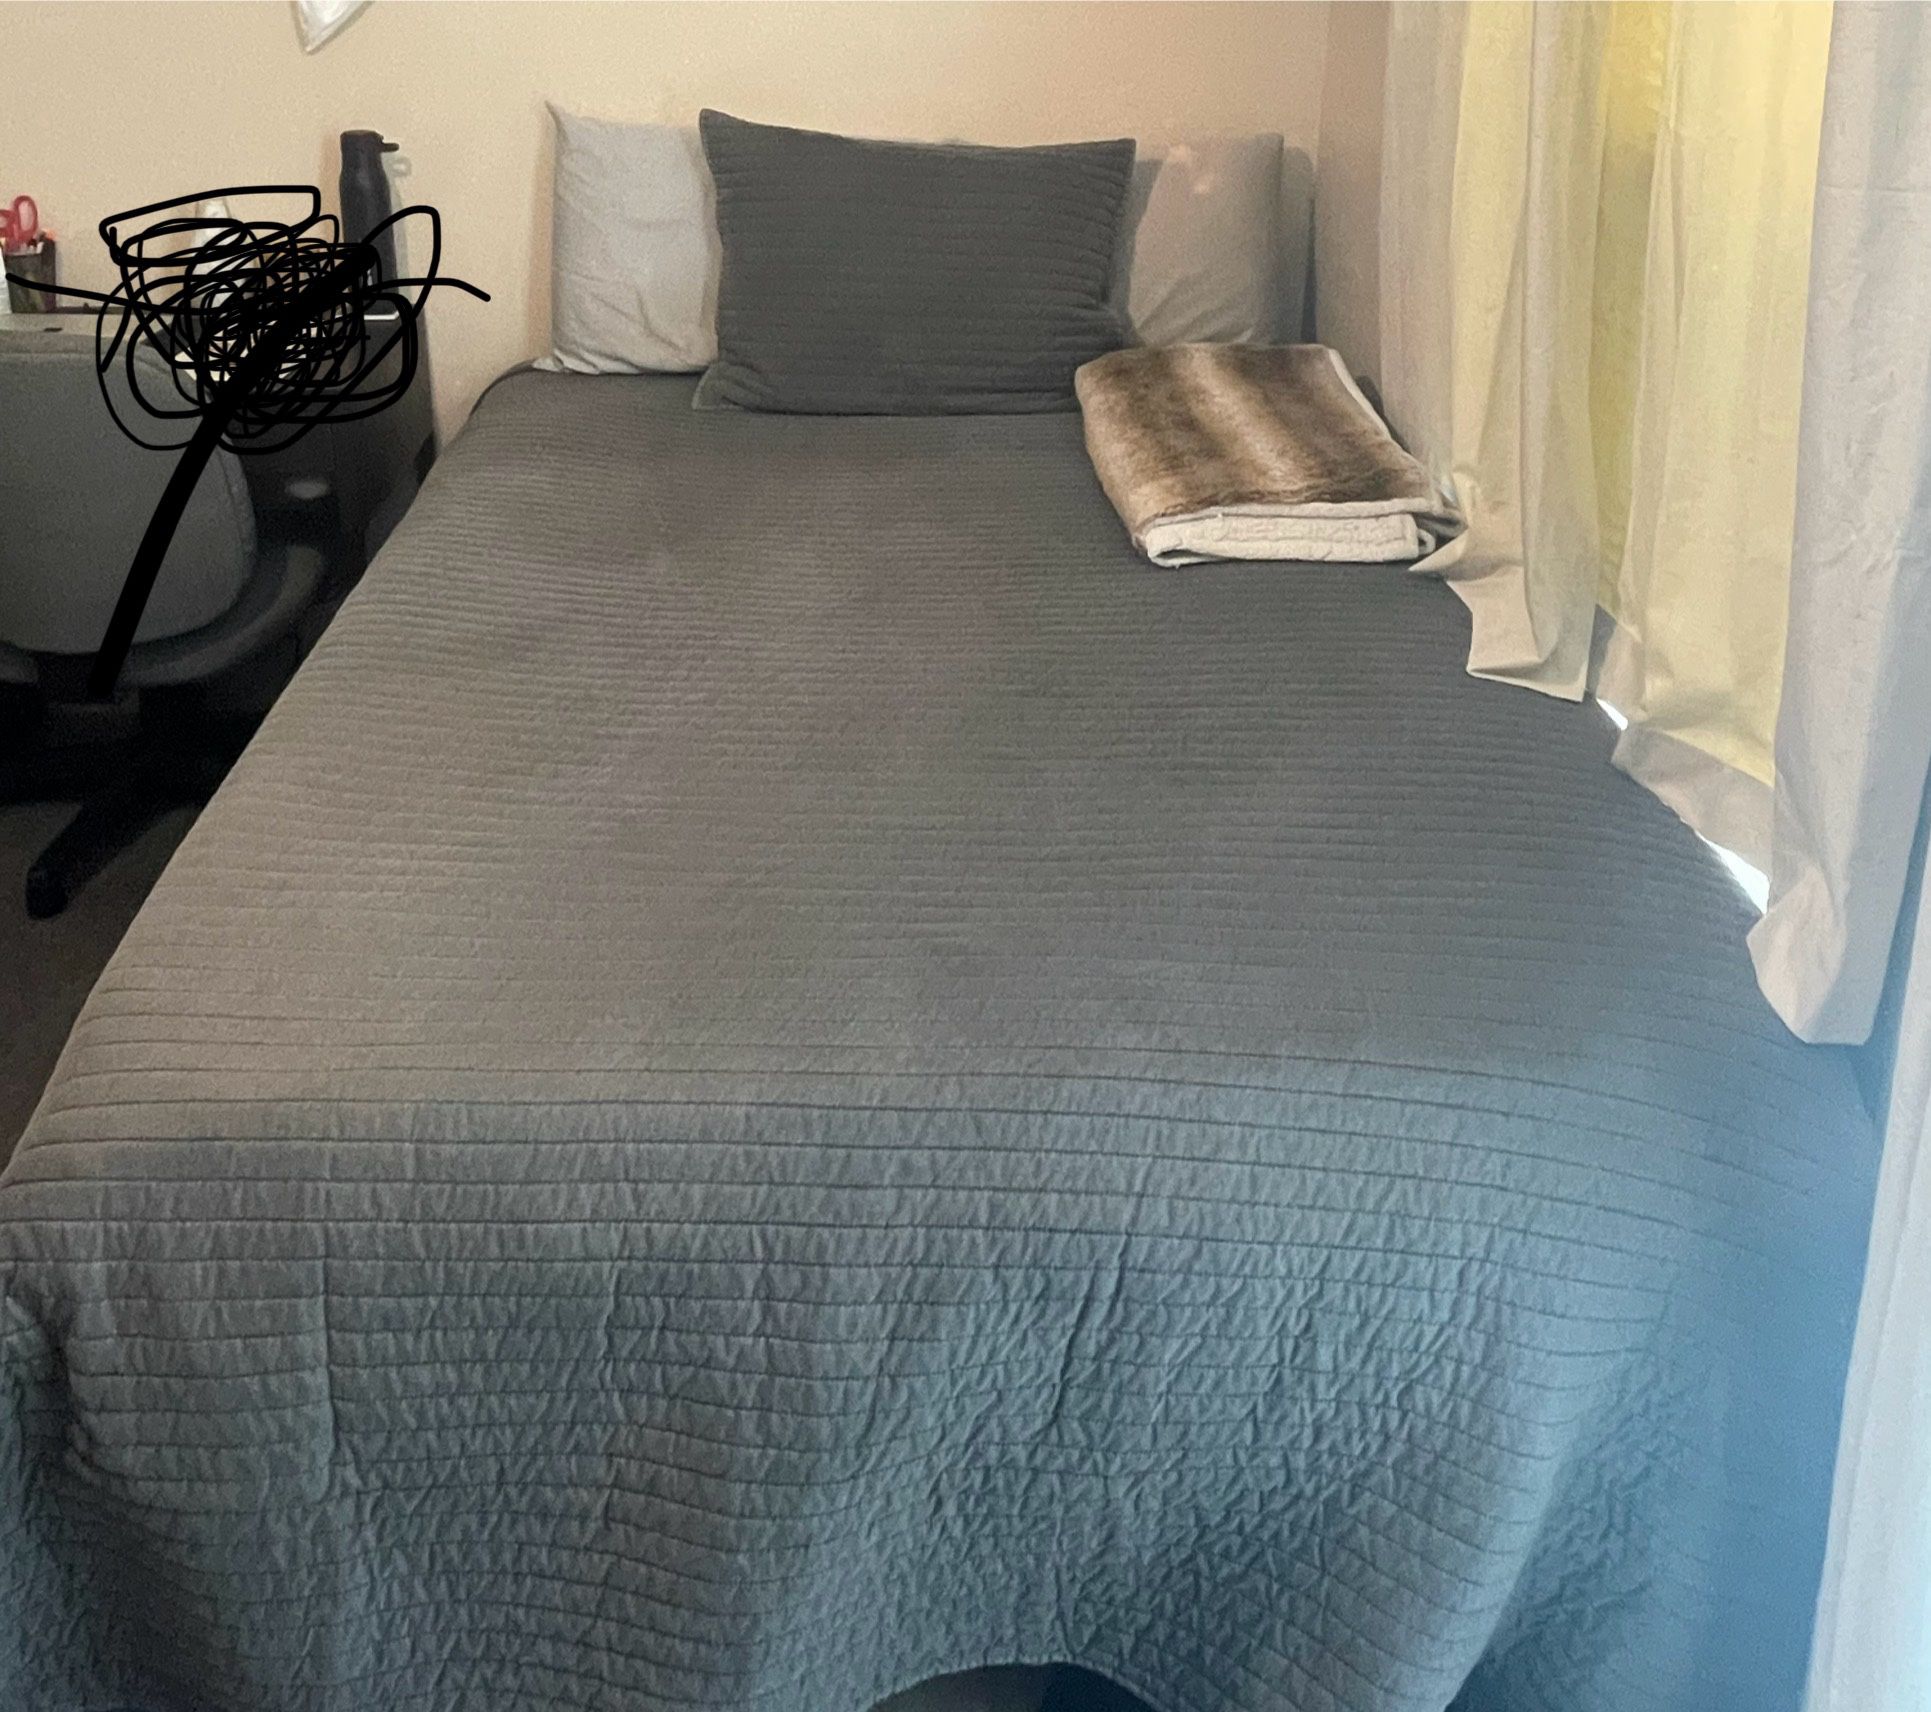 Matress + Memory Foam + Bed Frame + Box Spring For Sale! 